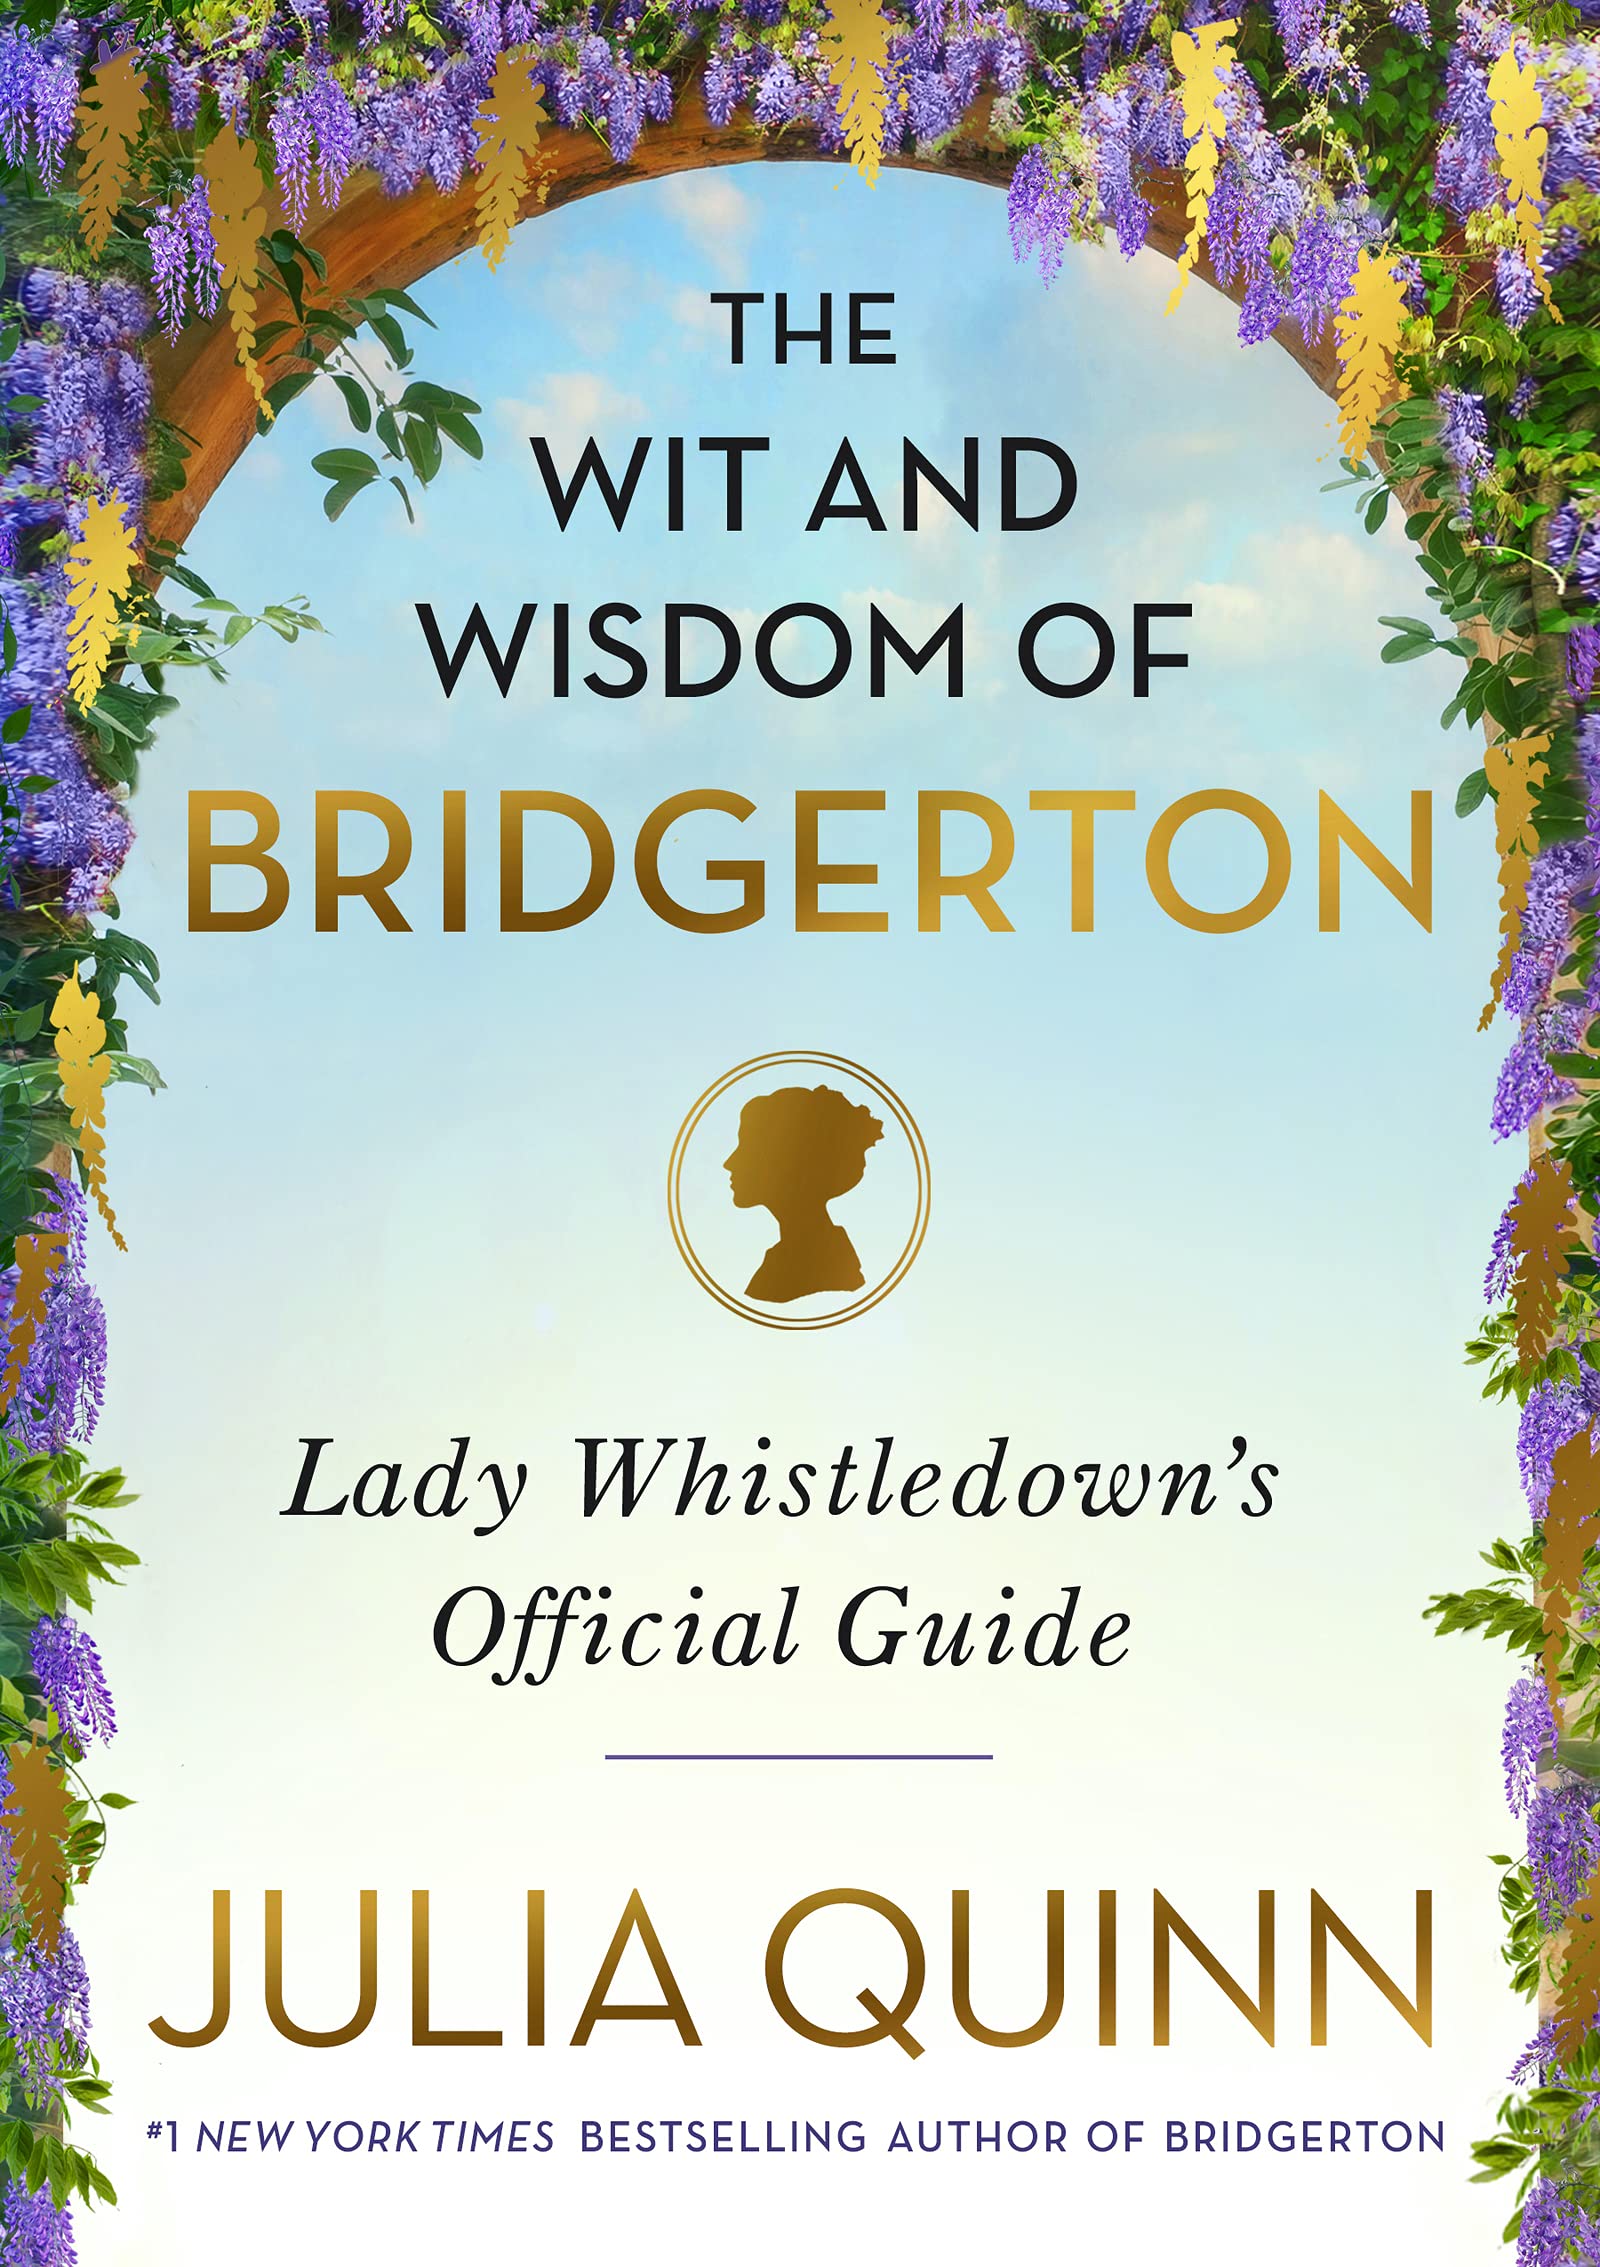 Bridgerton' Author Julia Quinn and Her Husband's Love Is Perfect